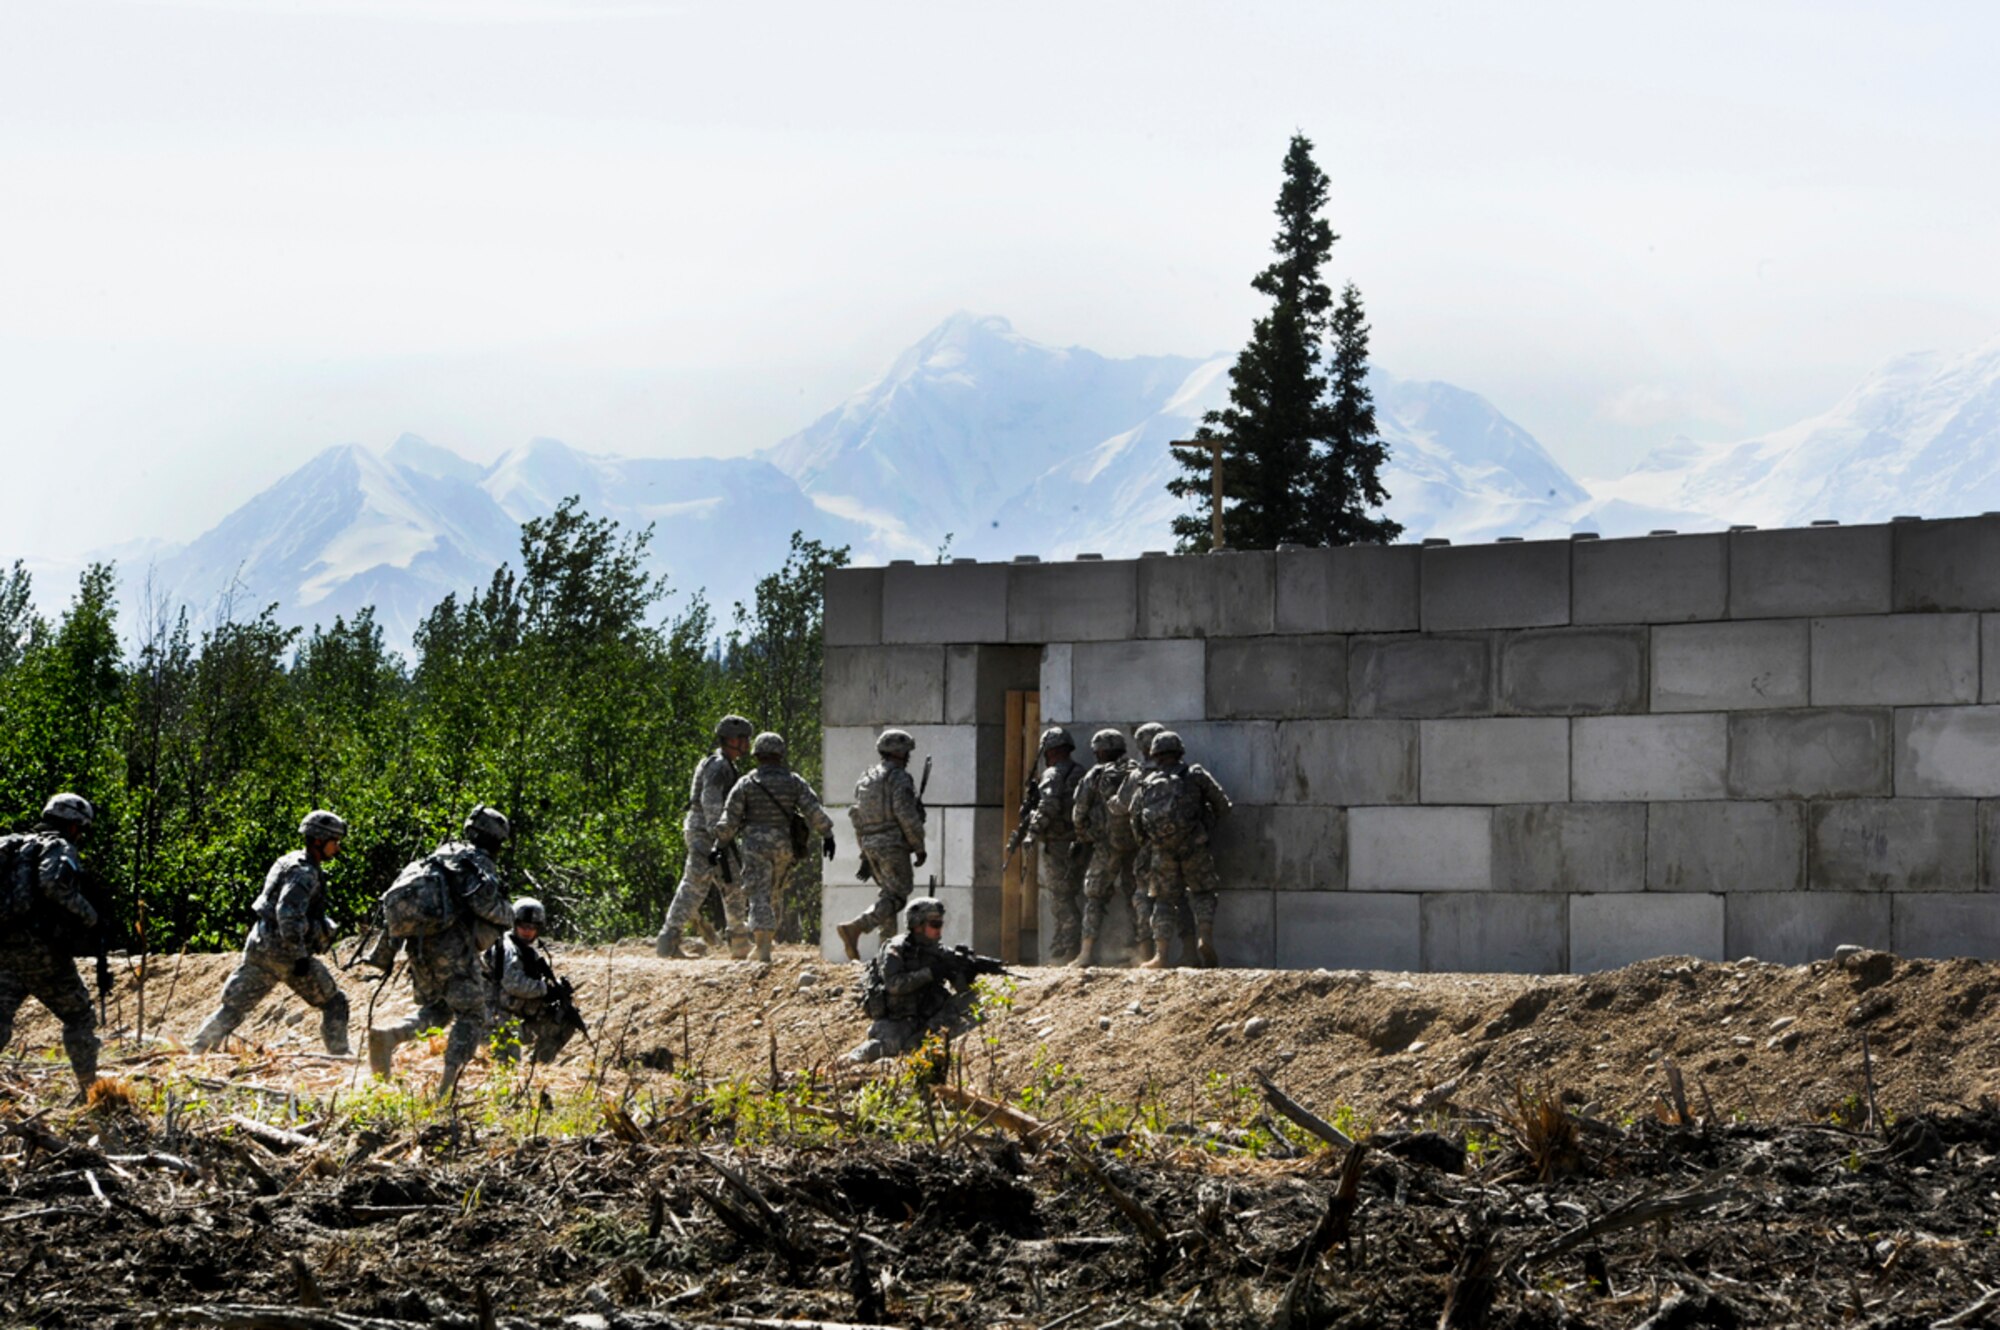 Paratroopers of Blackfoot Company, 1st Battalion (Airborne), 501st Infantry Regiment, enter a simulated improvised explosive device factory during a platoon-level live fire exercise at Donnelly Training Area, June 7. (Photo by Airman 1st Class Jack Sanders/JBER PA)